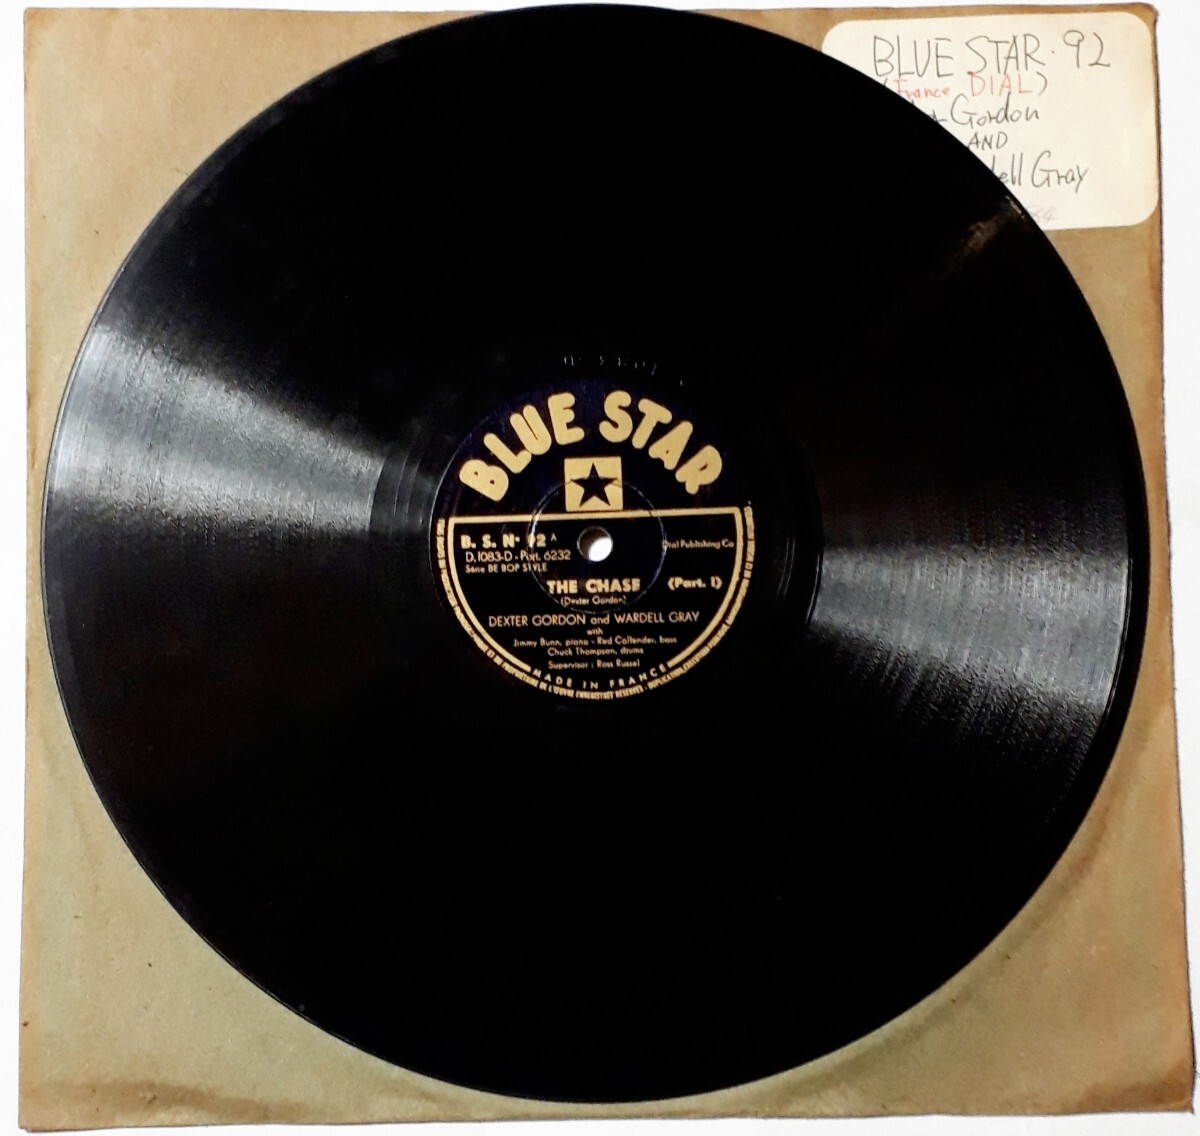 *SP78rpm*in FRANCE*DEXTER GORDON & WARDELL GRAY*BLUE STAR B.S.N.92 * THE CHASE *